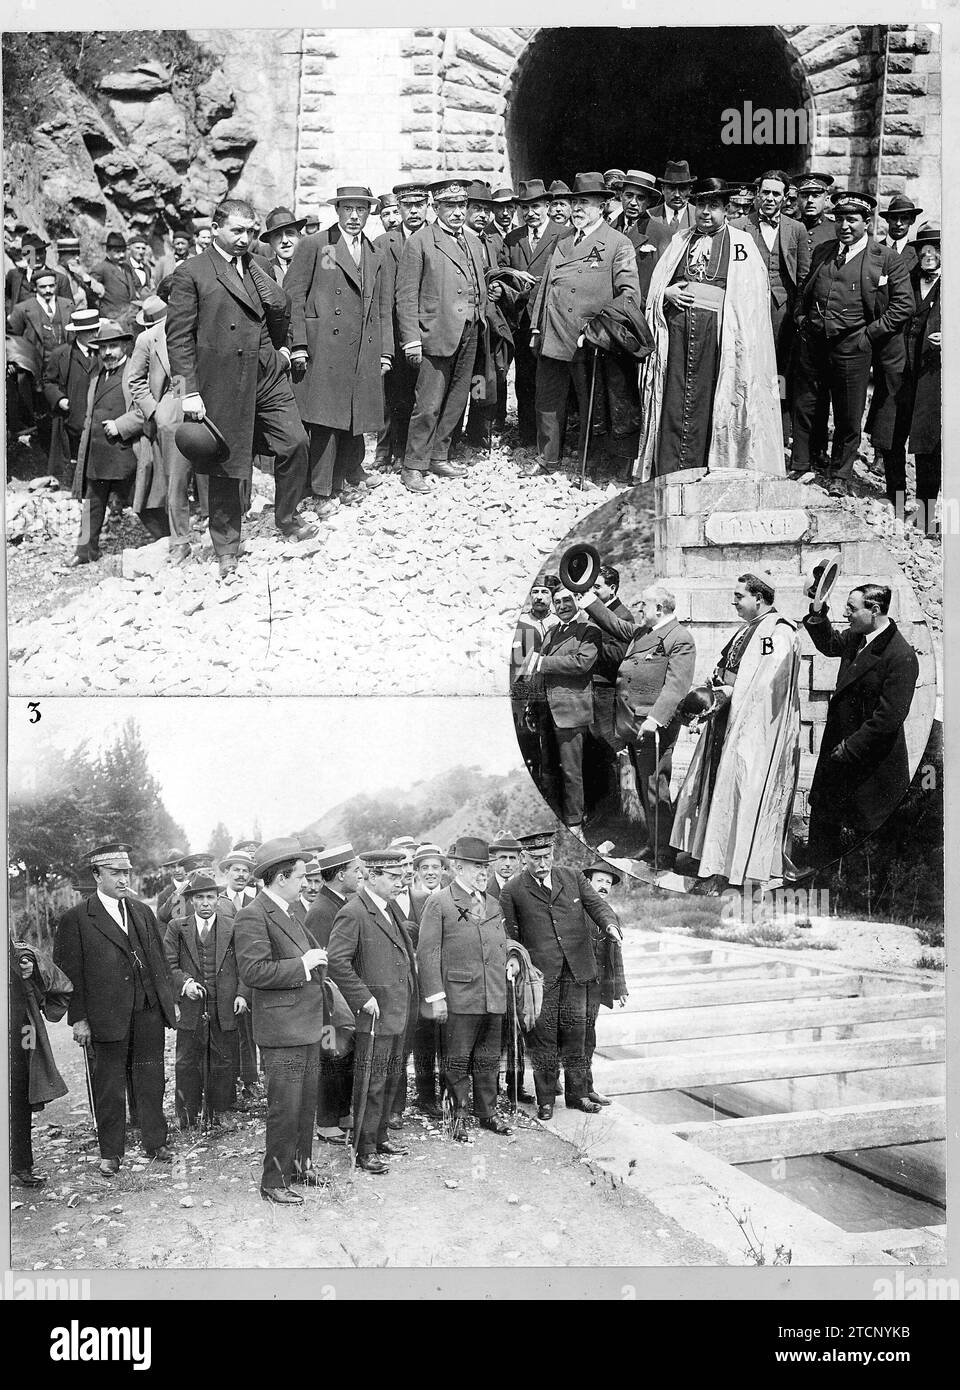 Huesca, June 1921. The trip of the Minister of Public Works. 1.Mr. La Cierva (A) with the bishop, mr. Frutos Valiente, (B), in the Canfranc tunnel. 2.On the French border. 3.The Minister (X), with his accompaniment, visiting the irrigation areas of Alto Aragón. Credit: Album / Archivo ABC / José Zegri Stock Photo